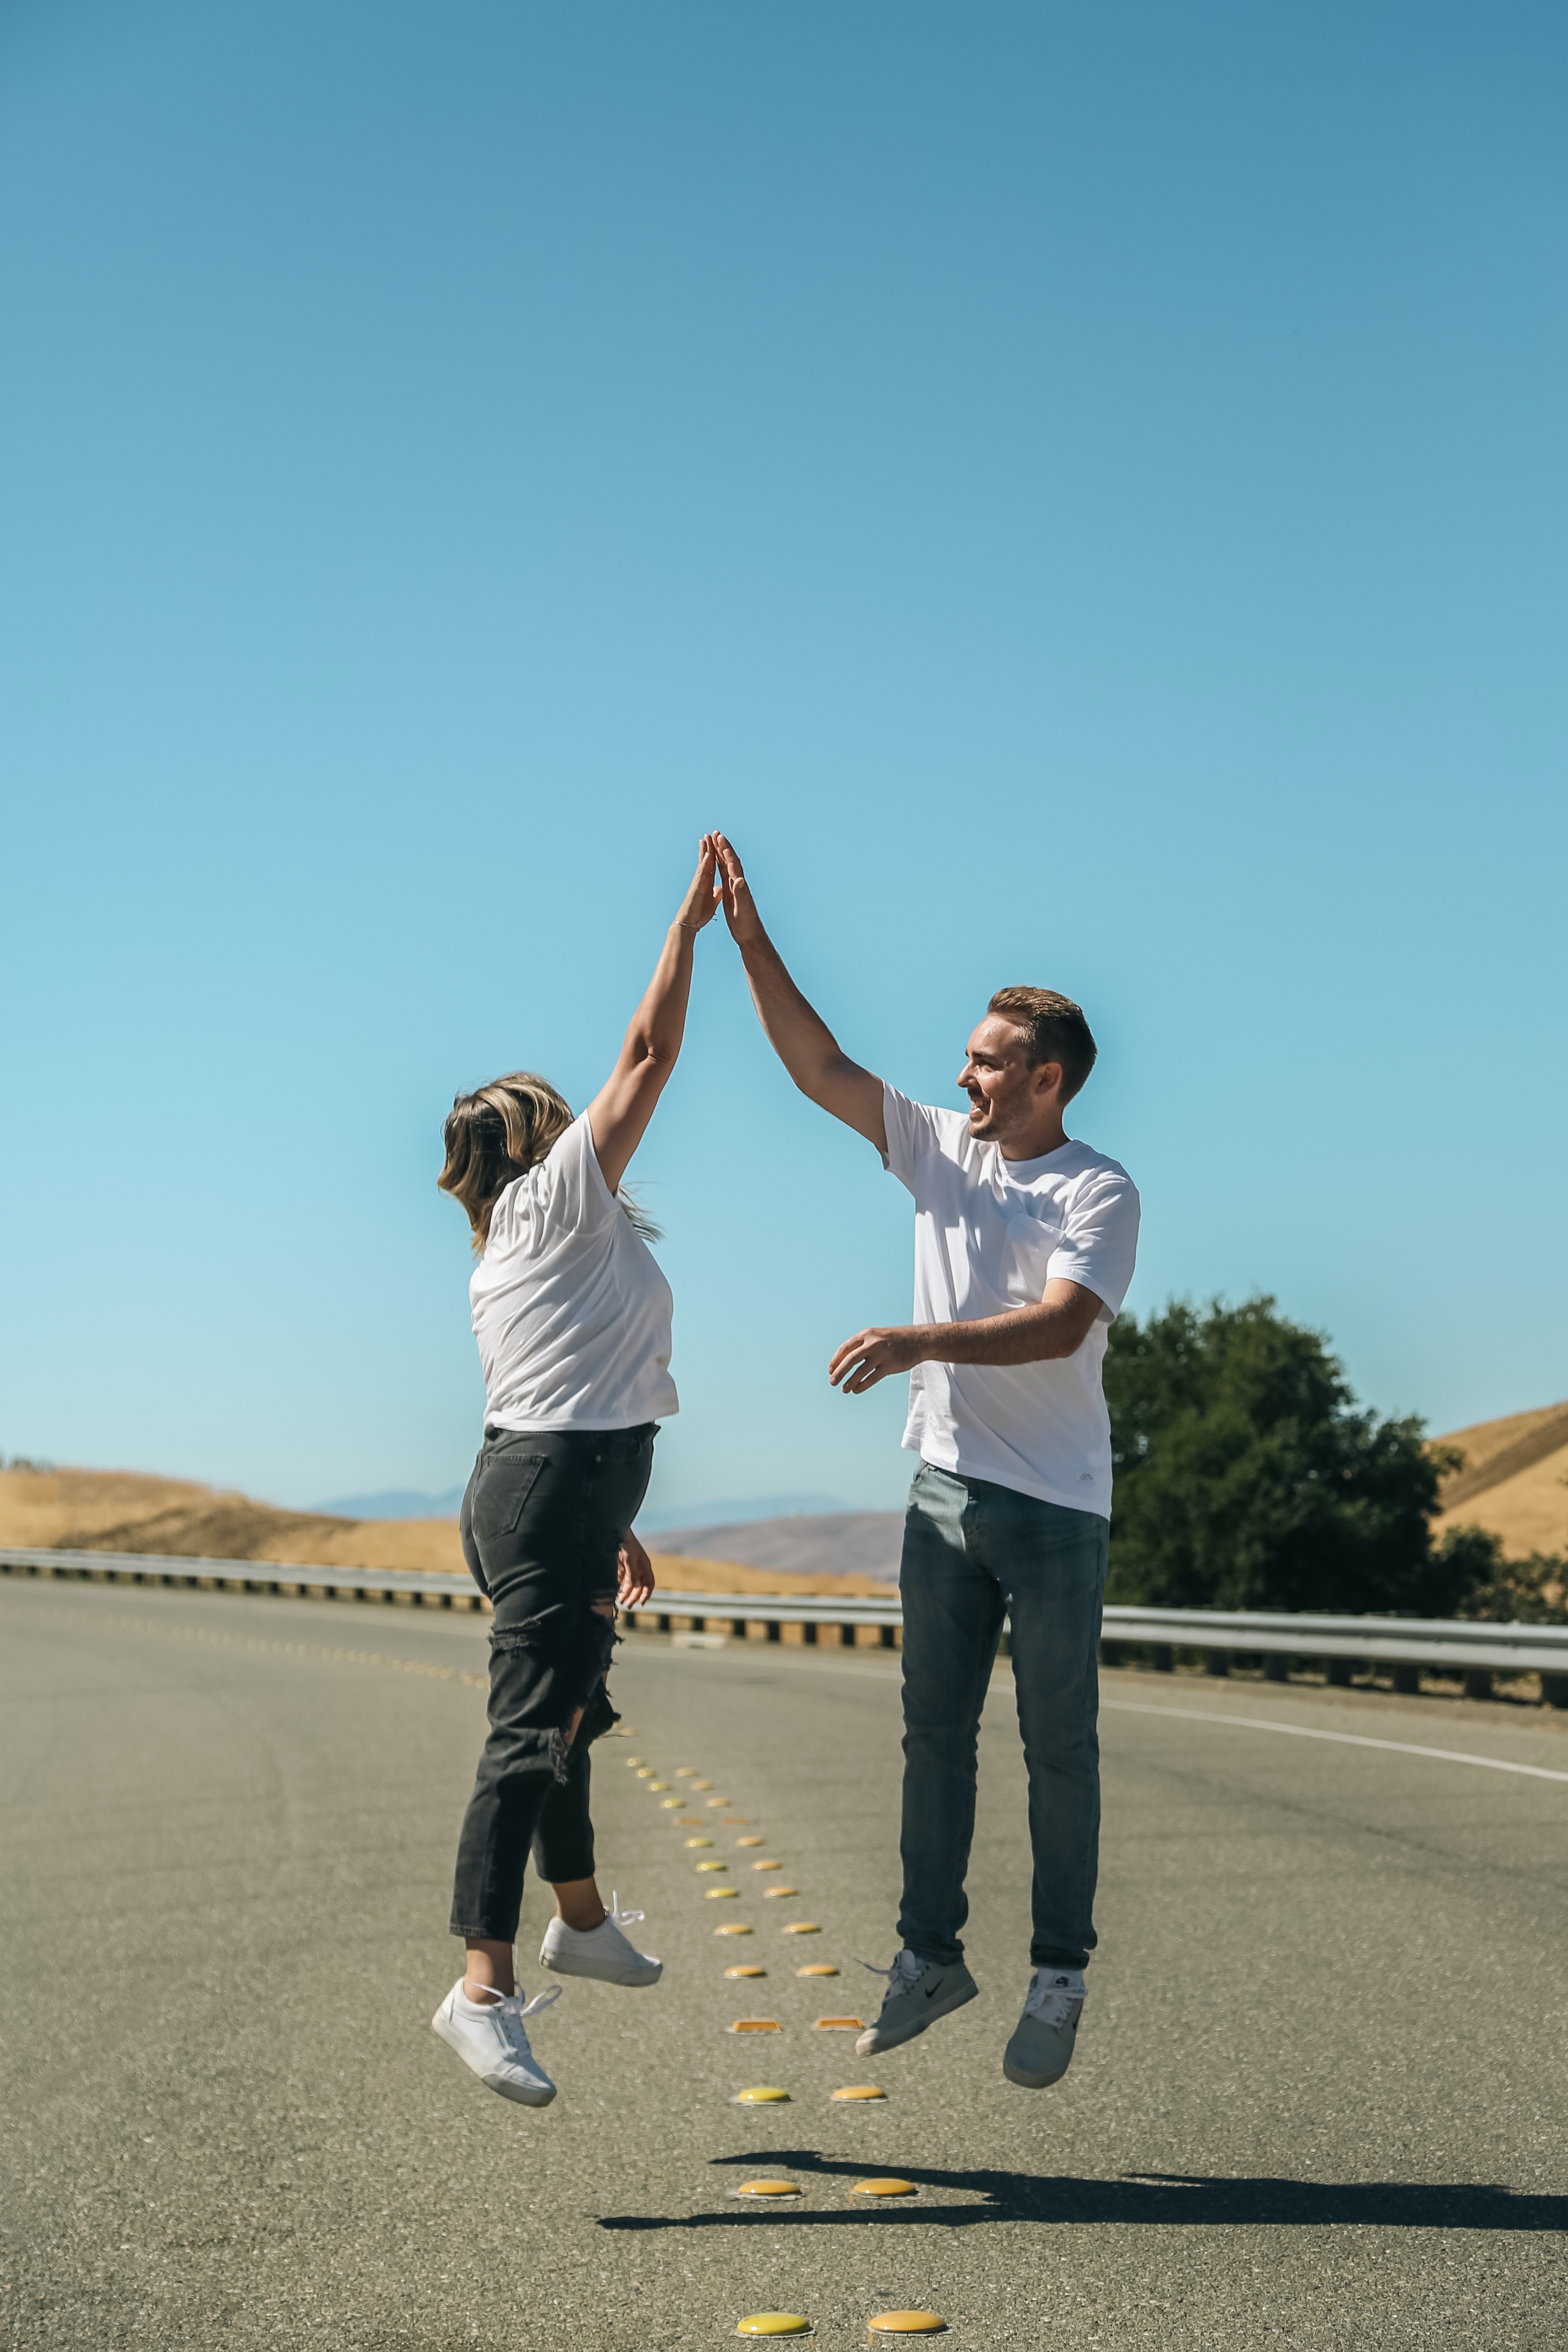 A couple jumping up and high-fiving. | Source: Unsplash